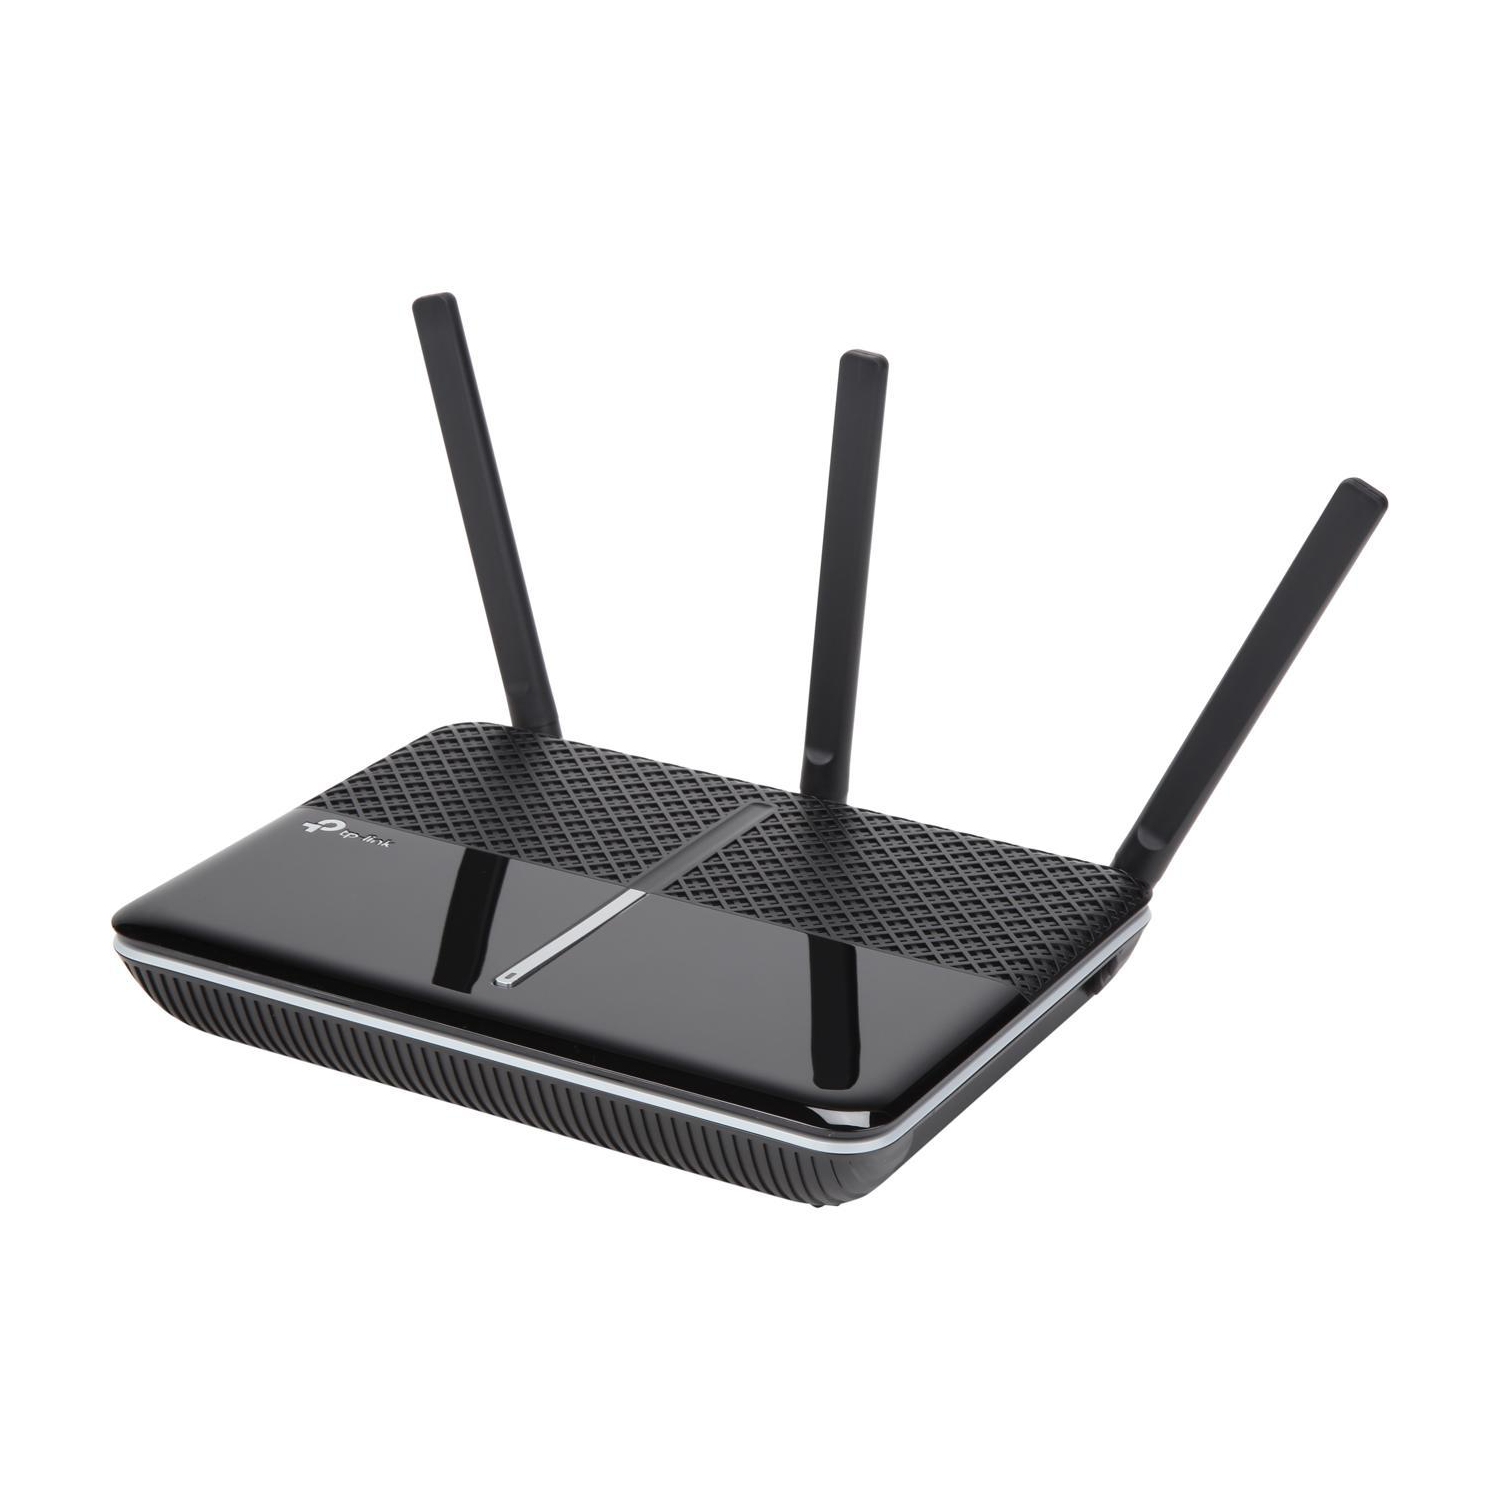 WIFI ROUTERS TP-Link AC2600 Smart Wi-Fi Router - MU-MIMO, Gigabit, Beamforming, VPN Server, Works with Alexa & IFTTT (Archer A10)